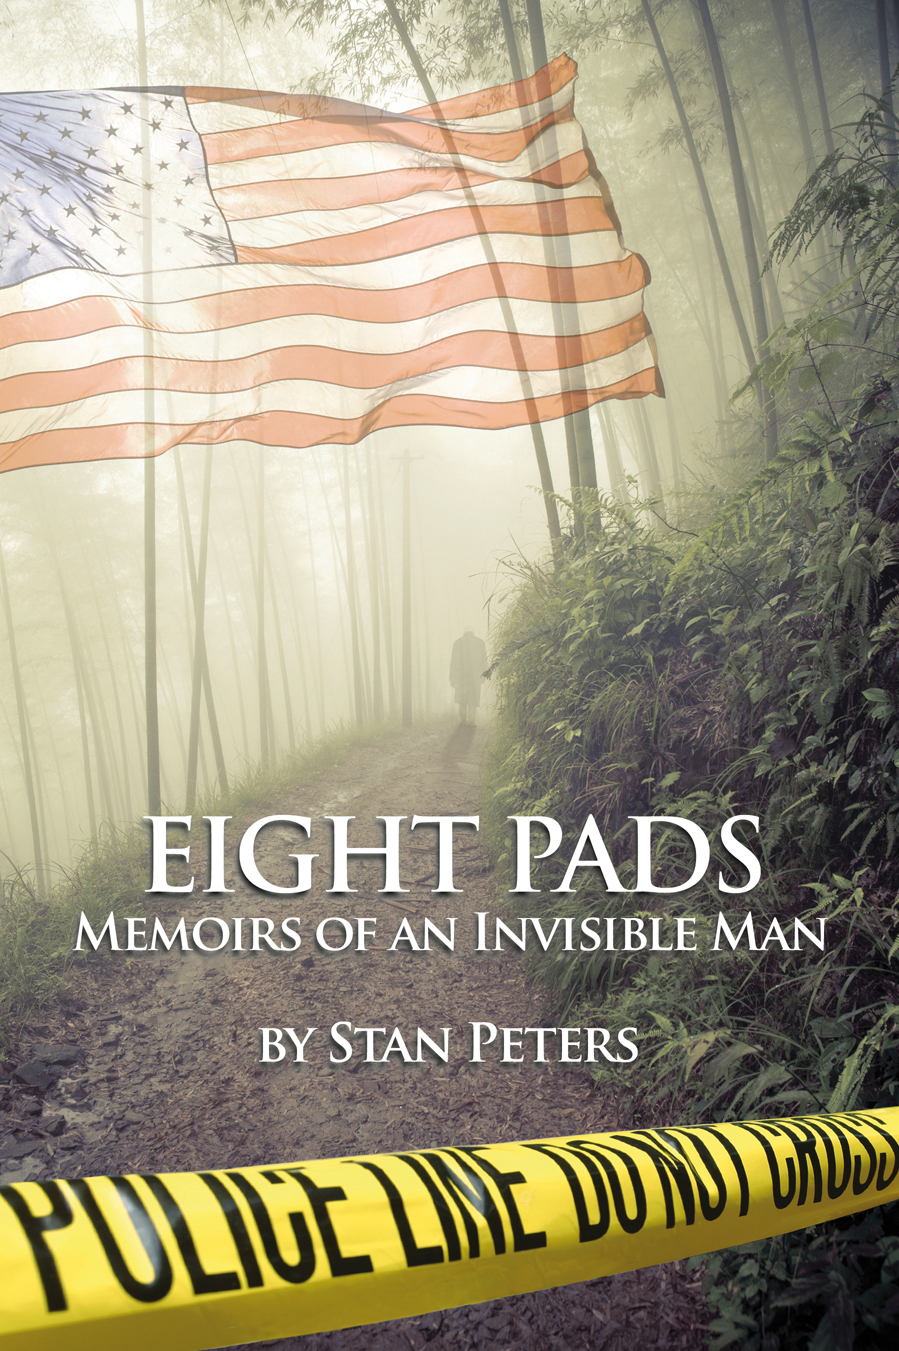 Eight Pads by Stan Peters